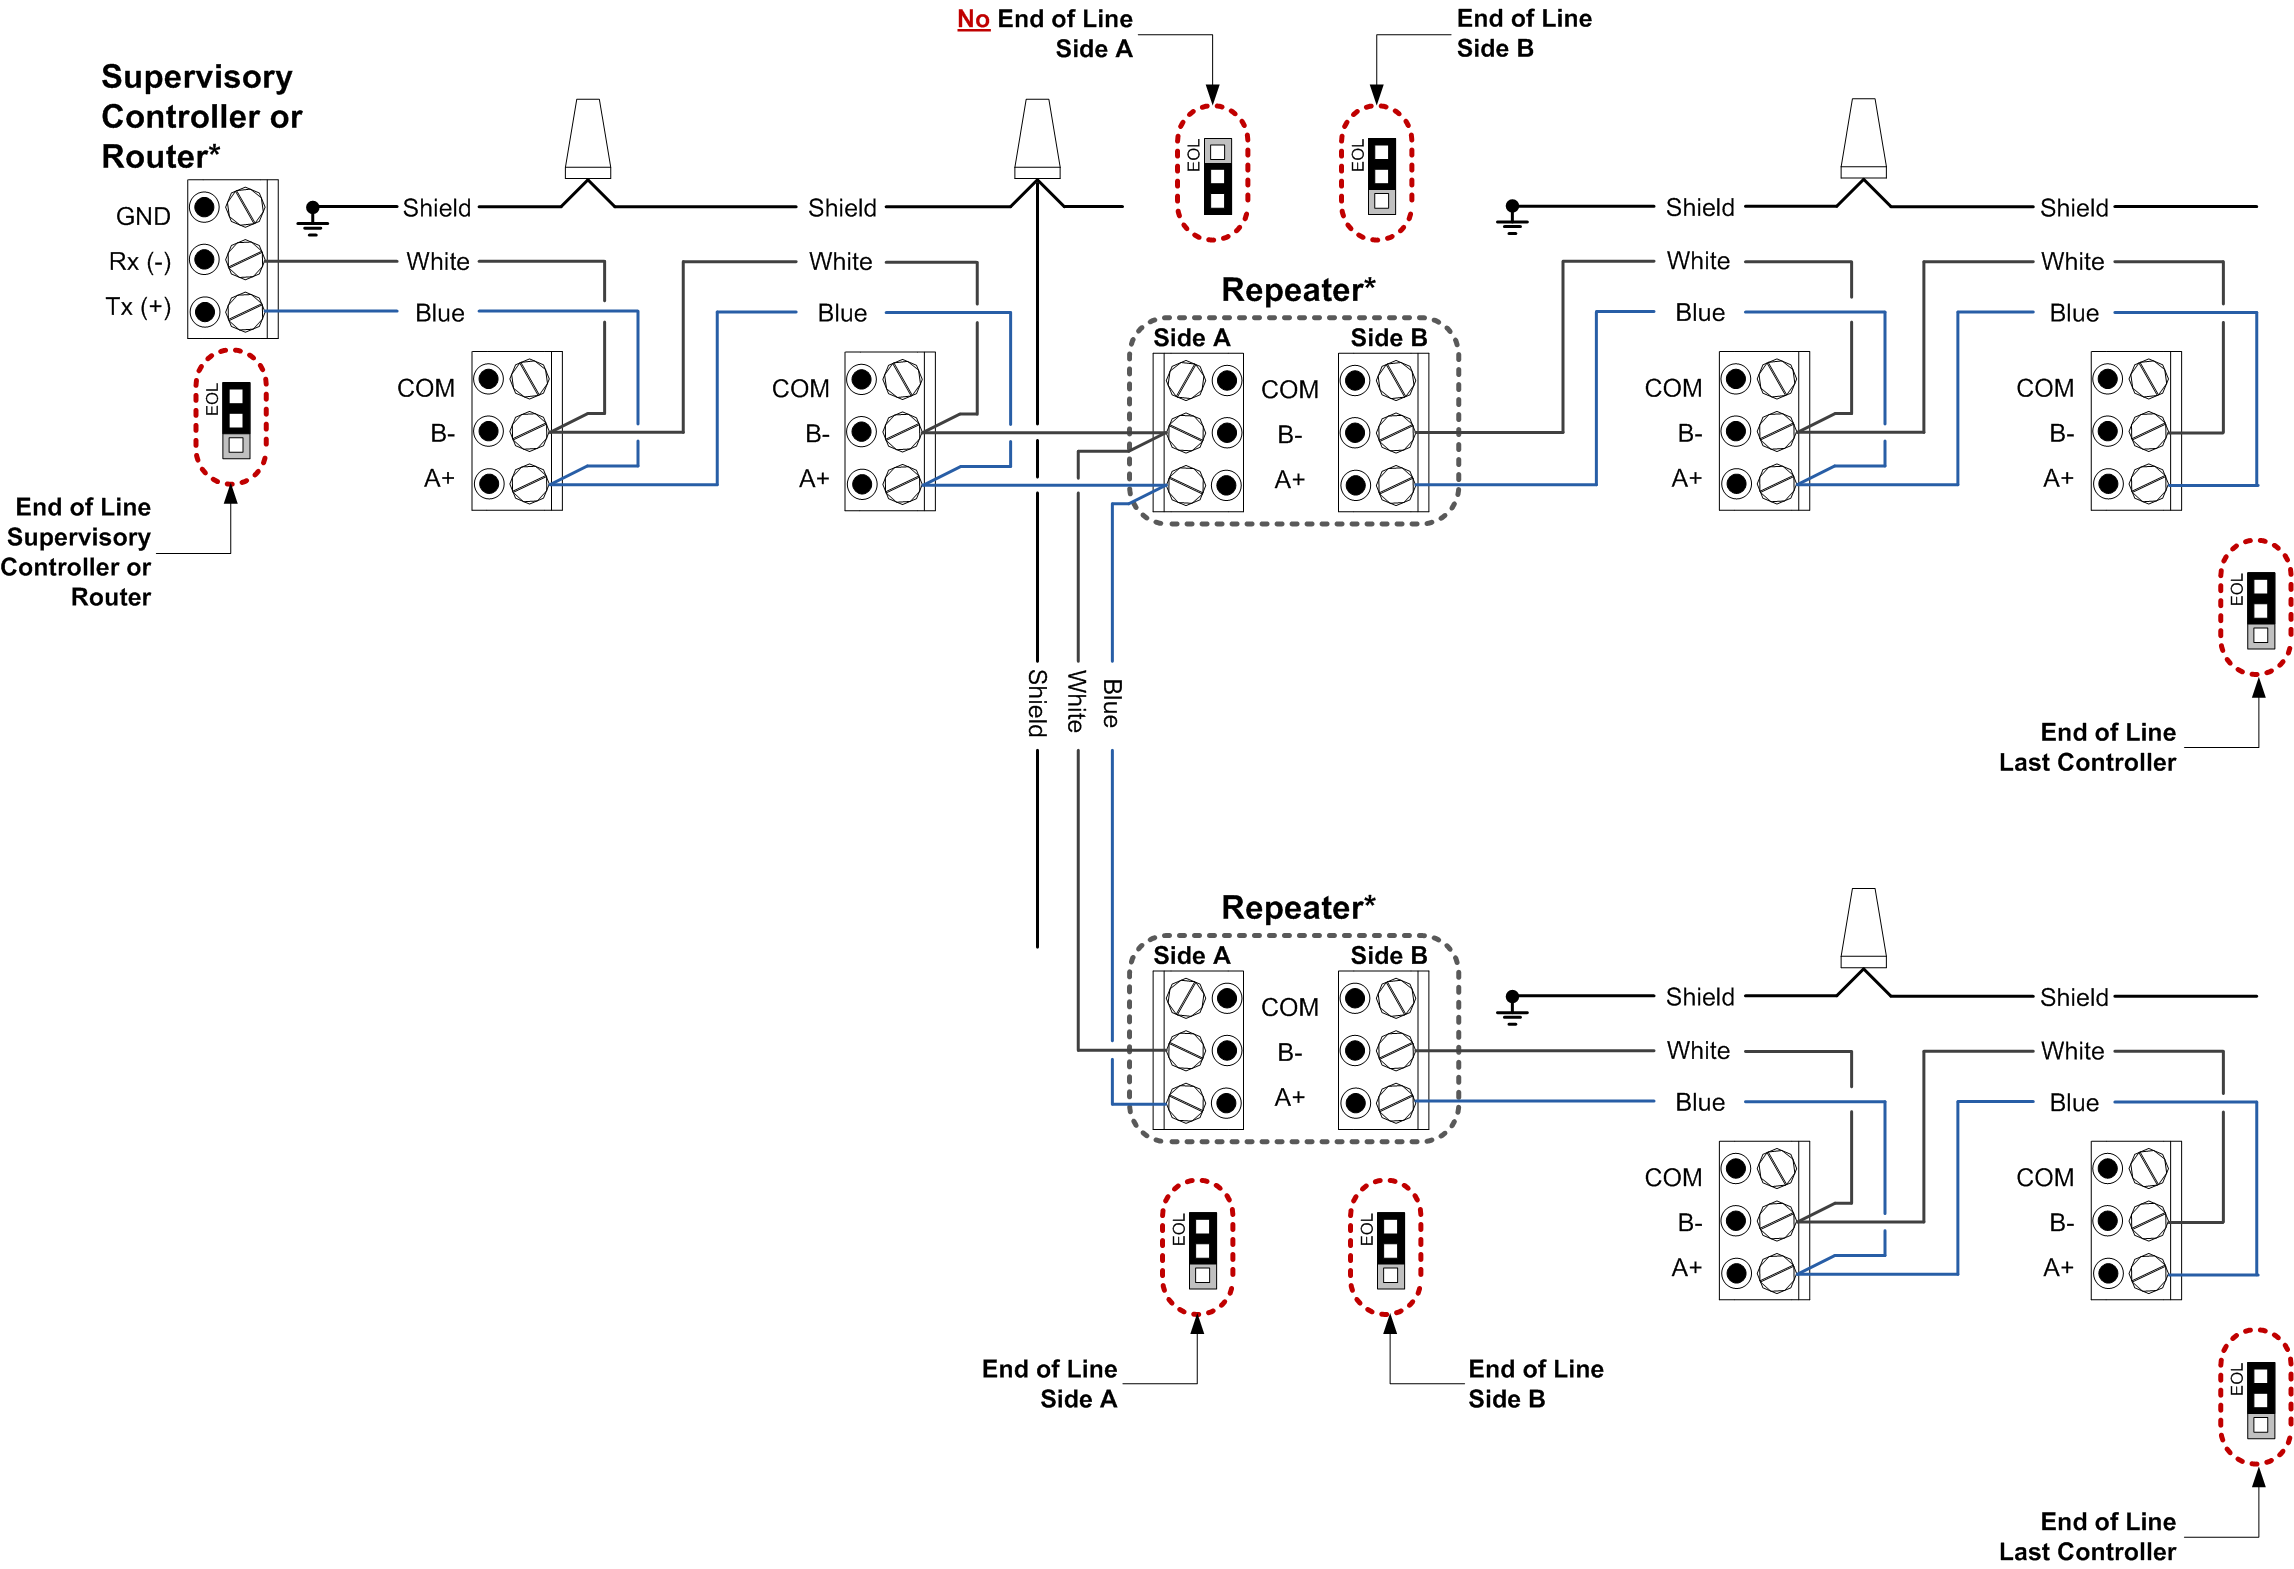 BACnet Wiring (Part 2 of 3)